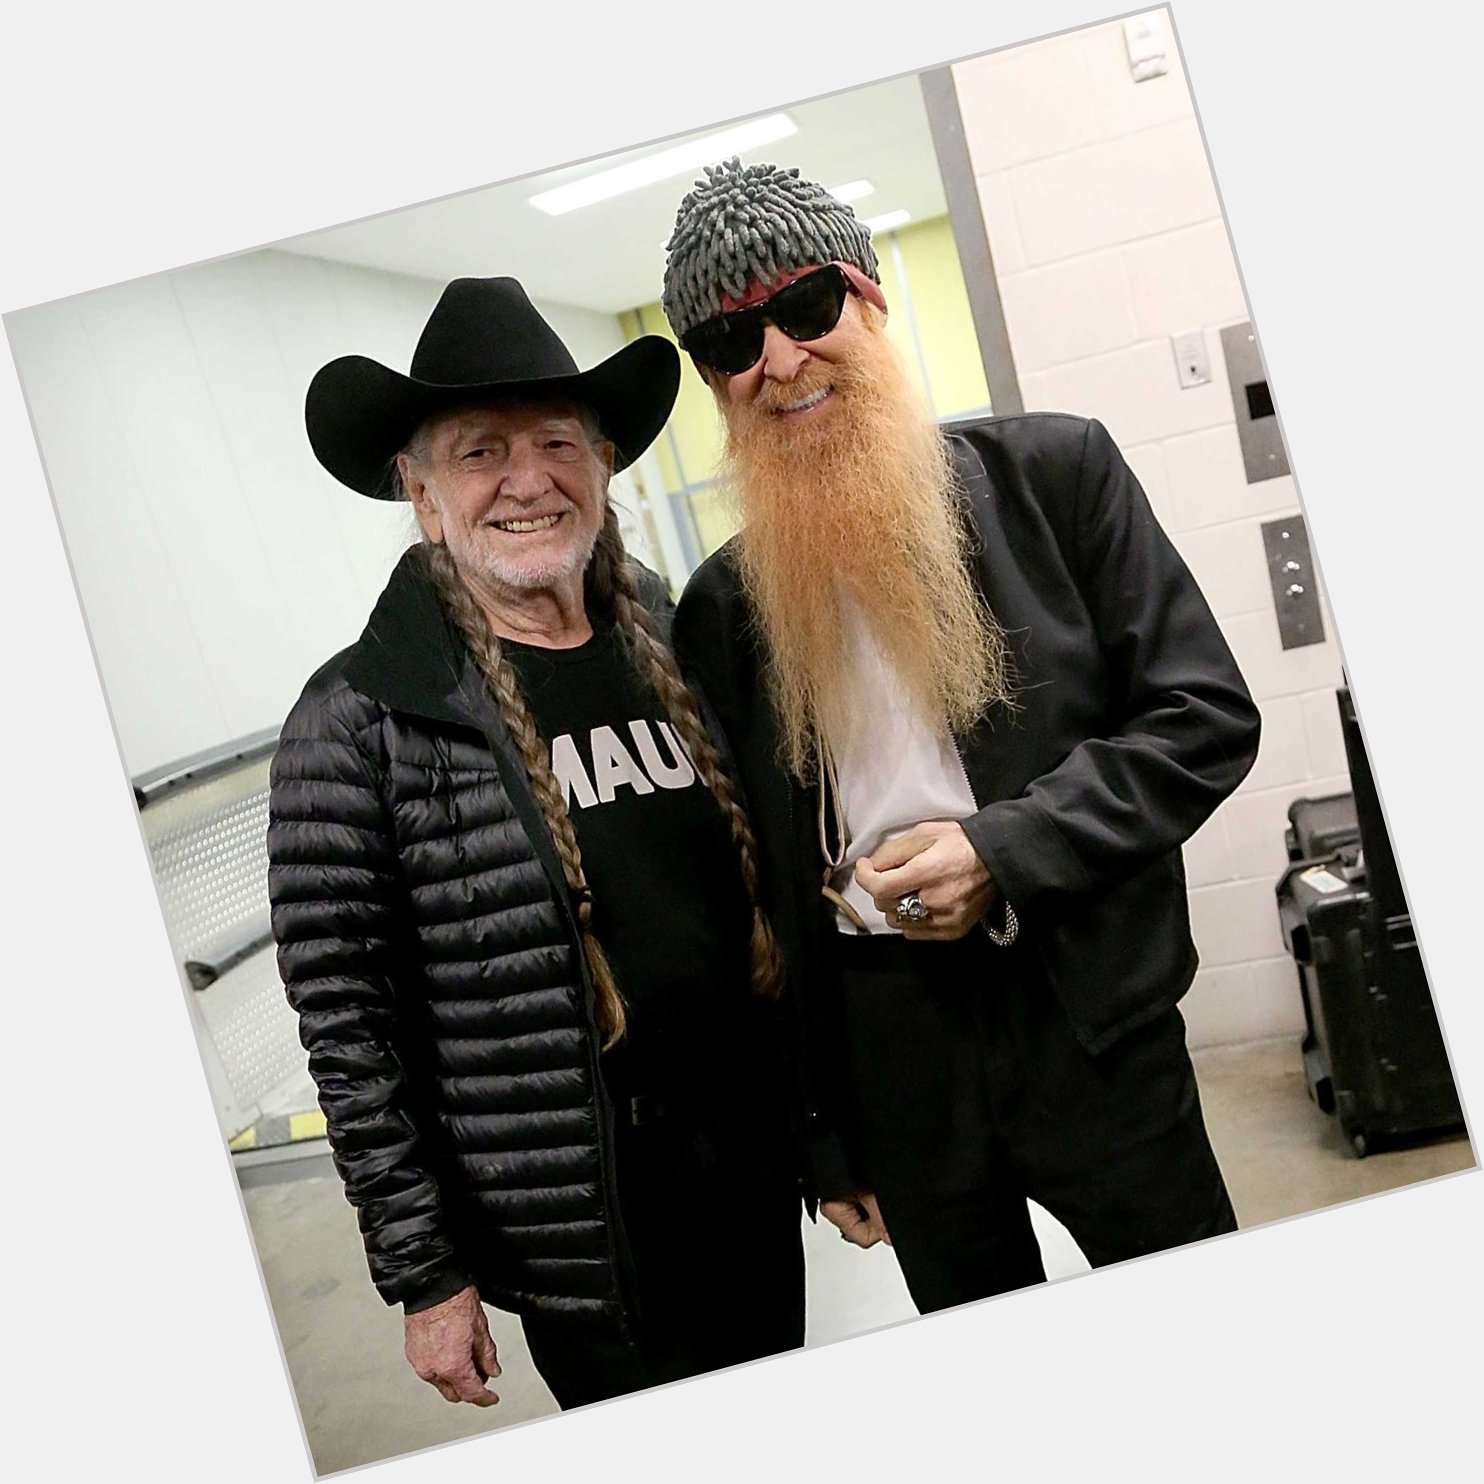 We Would Like To Wish A Very Happy Birthday To Billy Gibbons!  